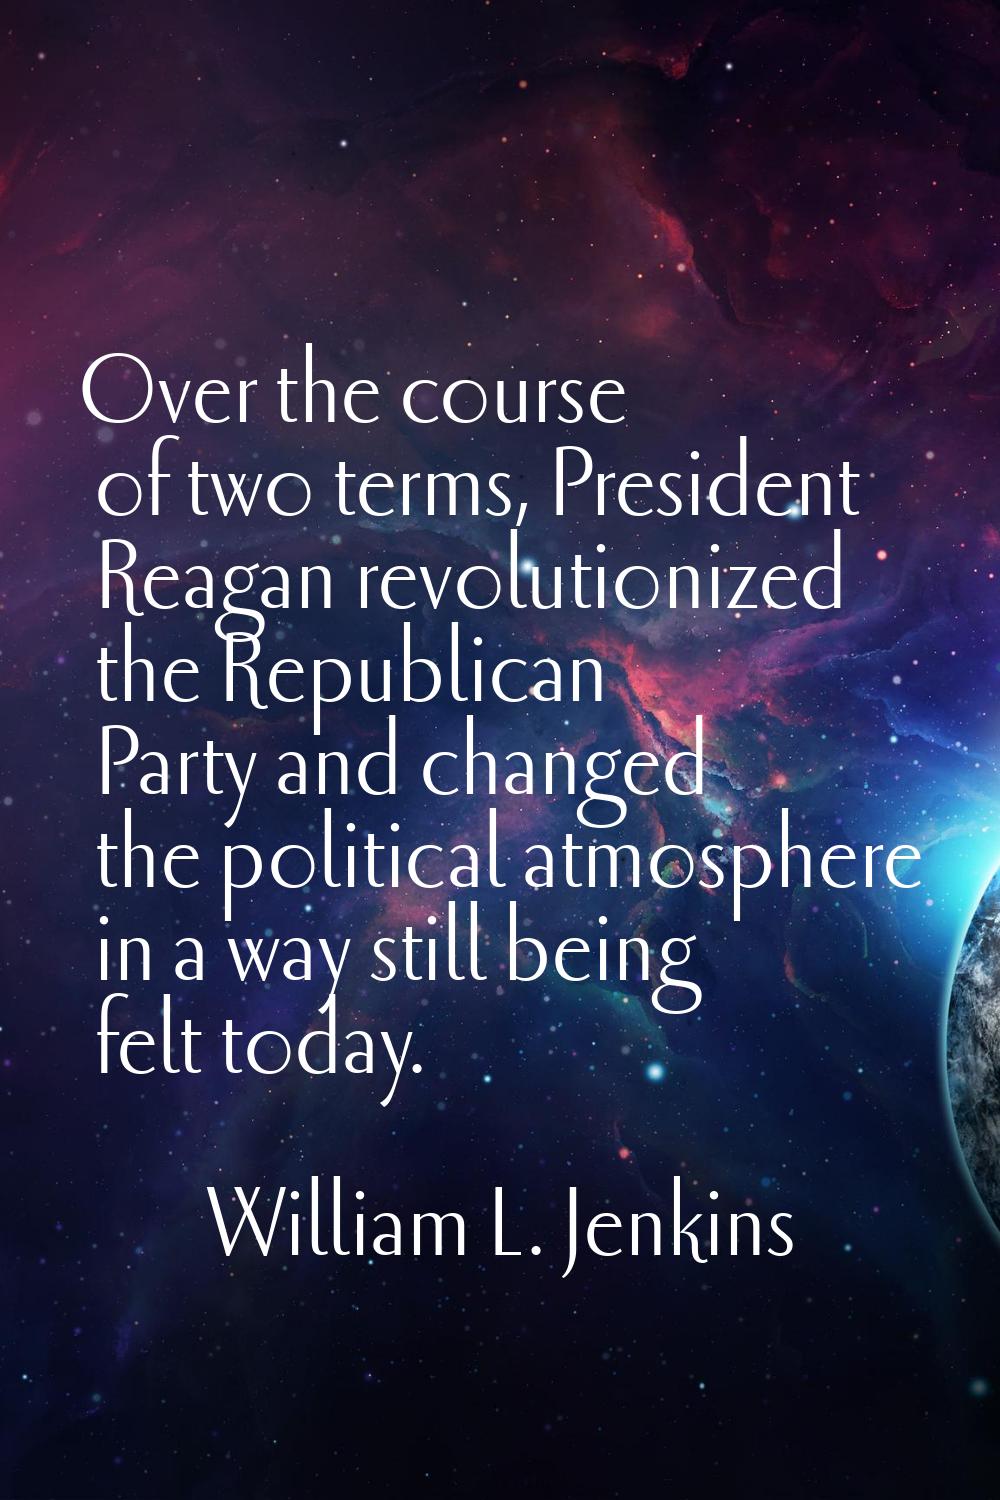 Over the course of two terms, President Reagan revolutionized the Republican Party and changed the 